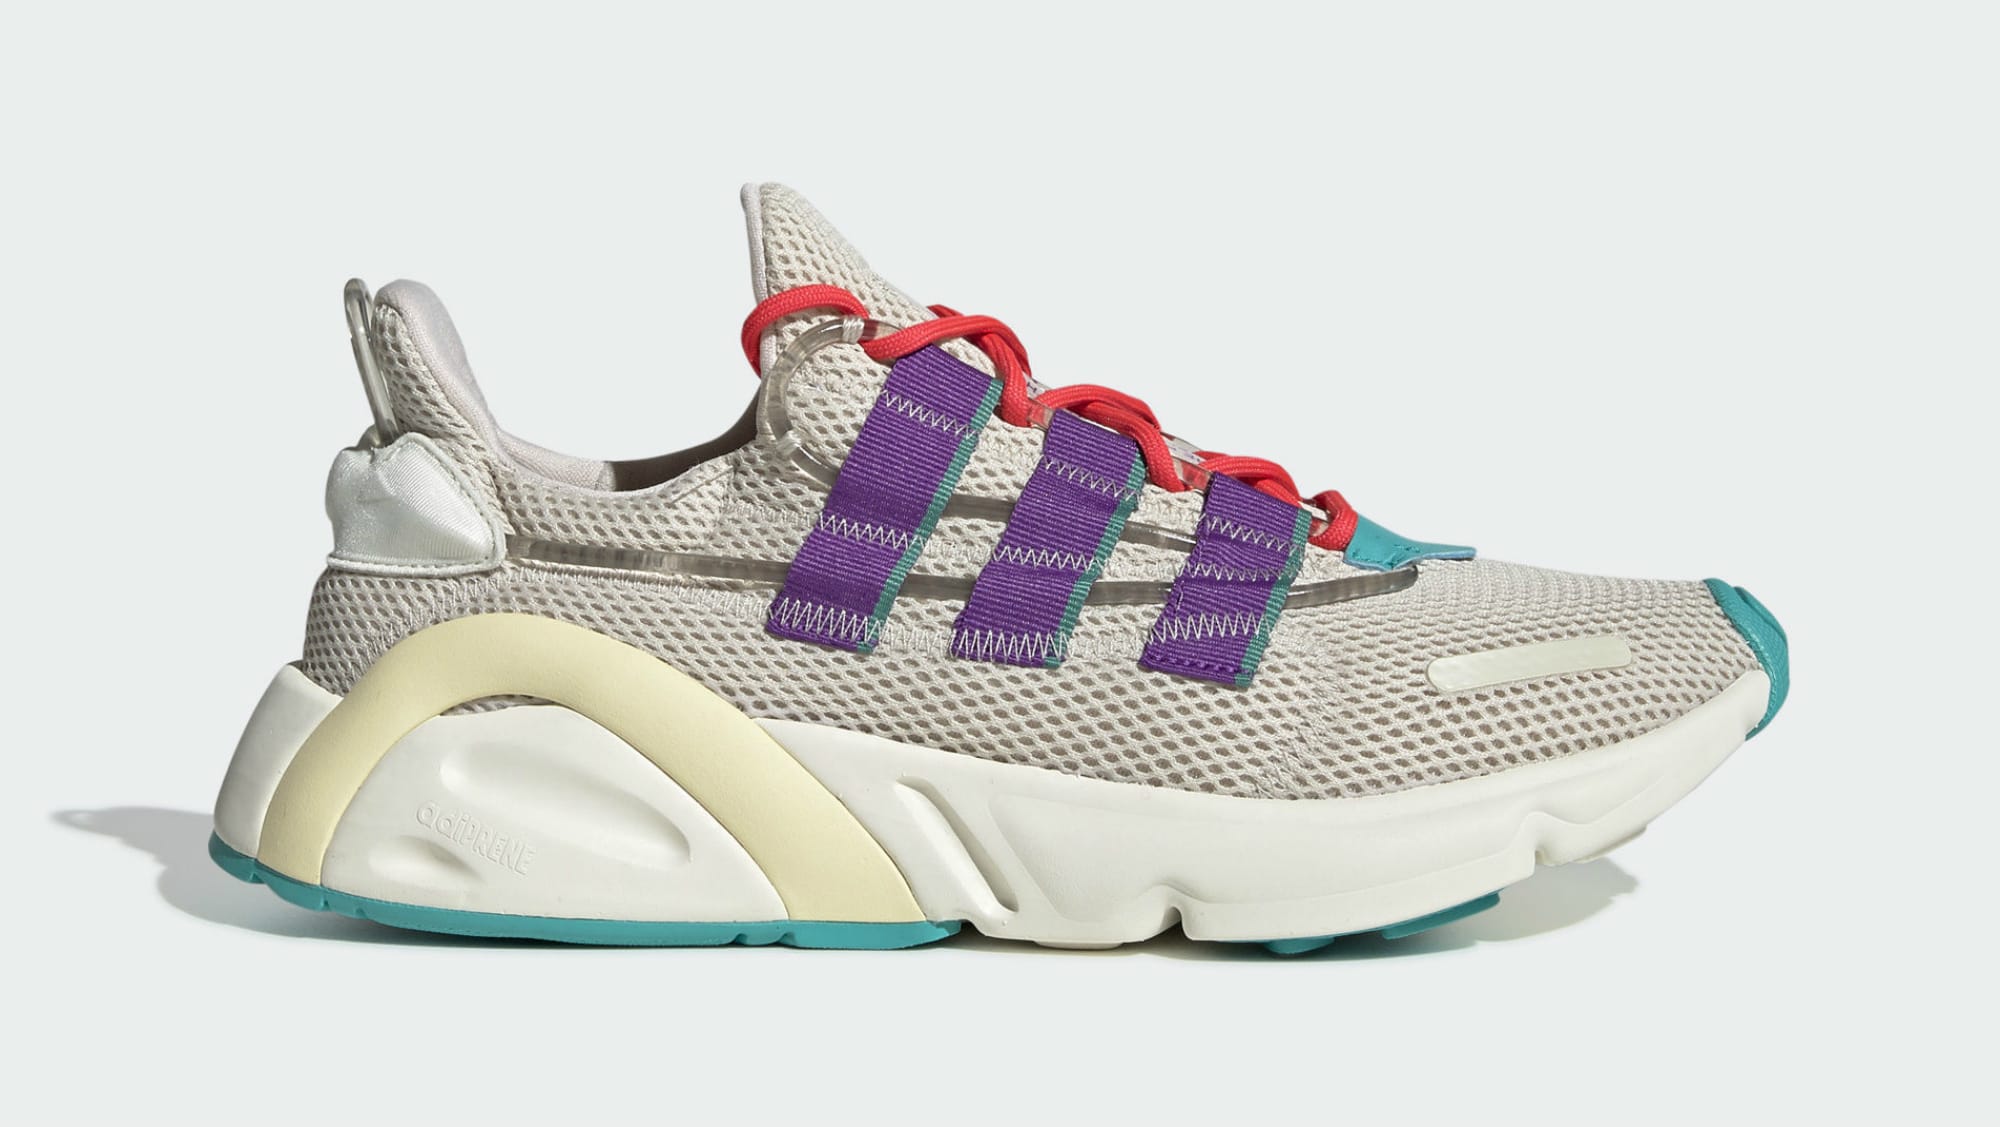 adidas-originals-lxcon-clear-brown-active-purple-shock-red-ee7403-release-date